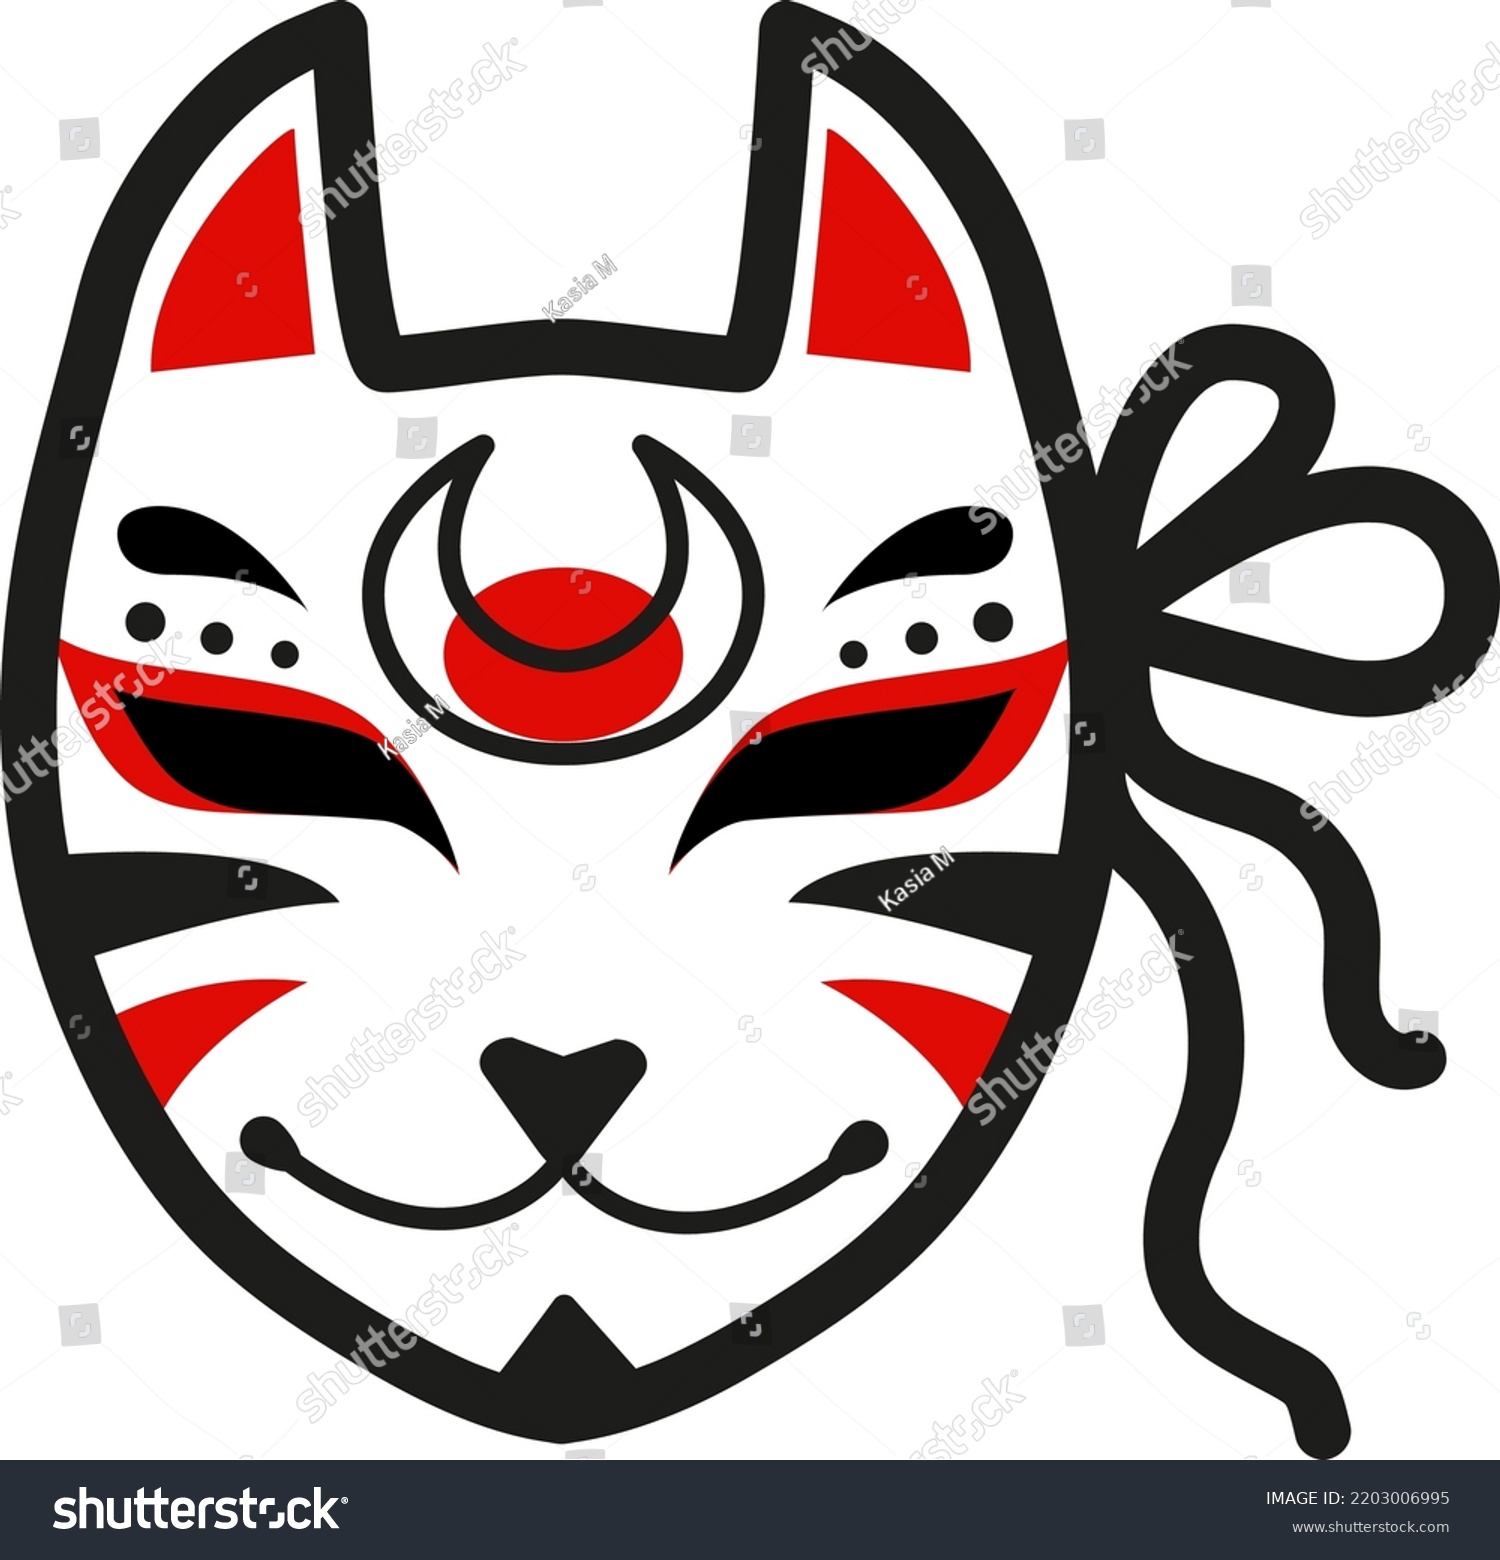 465 Wolf masquerade mask Images, Stock Photos & Vectors | Shutterstock